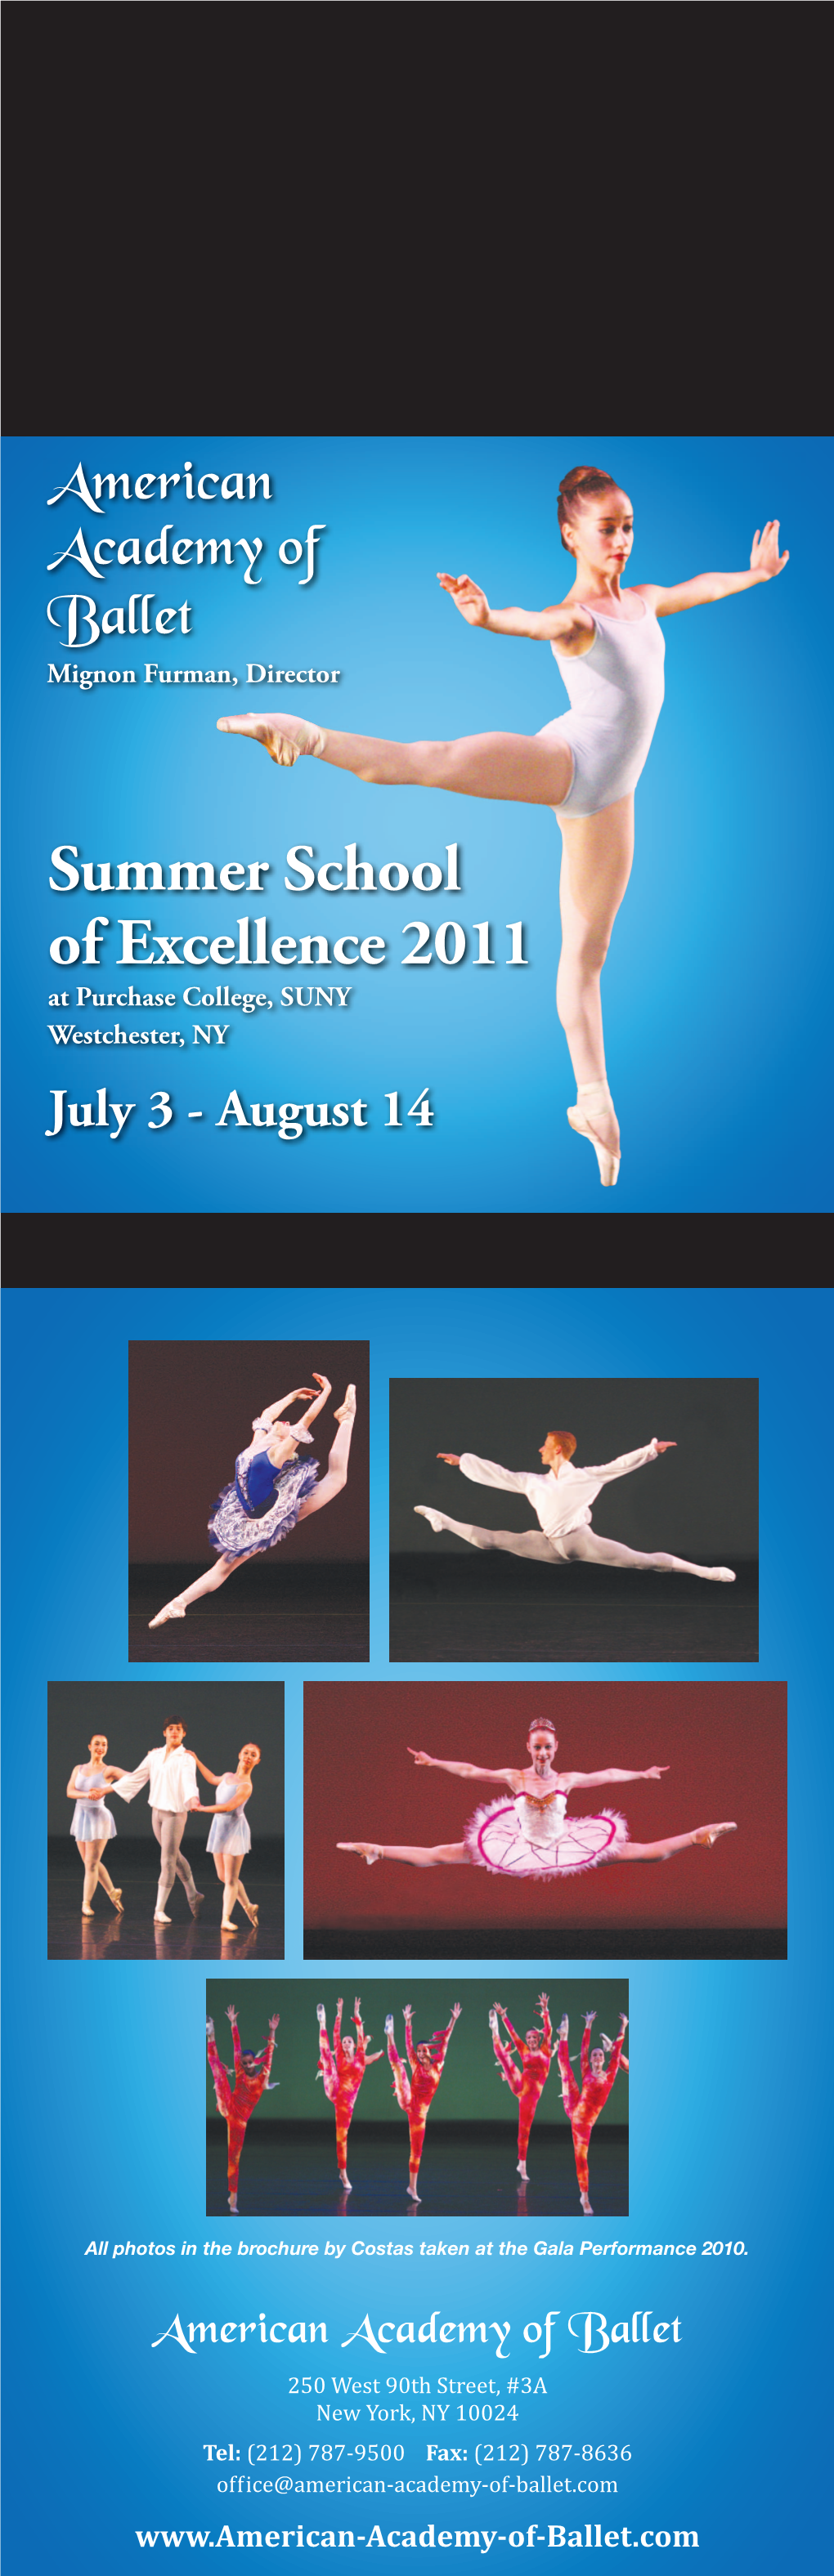 Summer School of Excellence 2011 at Purchase College, SUNY Westchester, NY July 3 - August 14